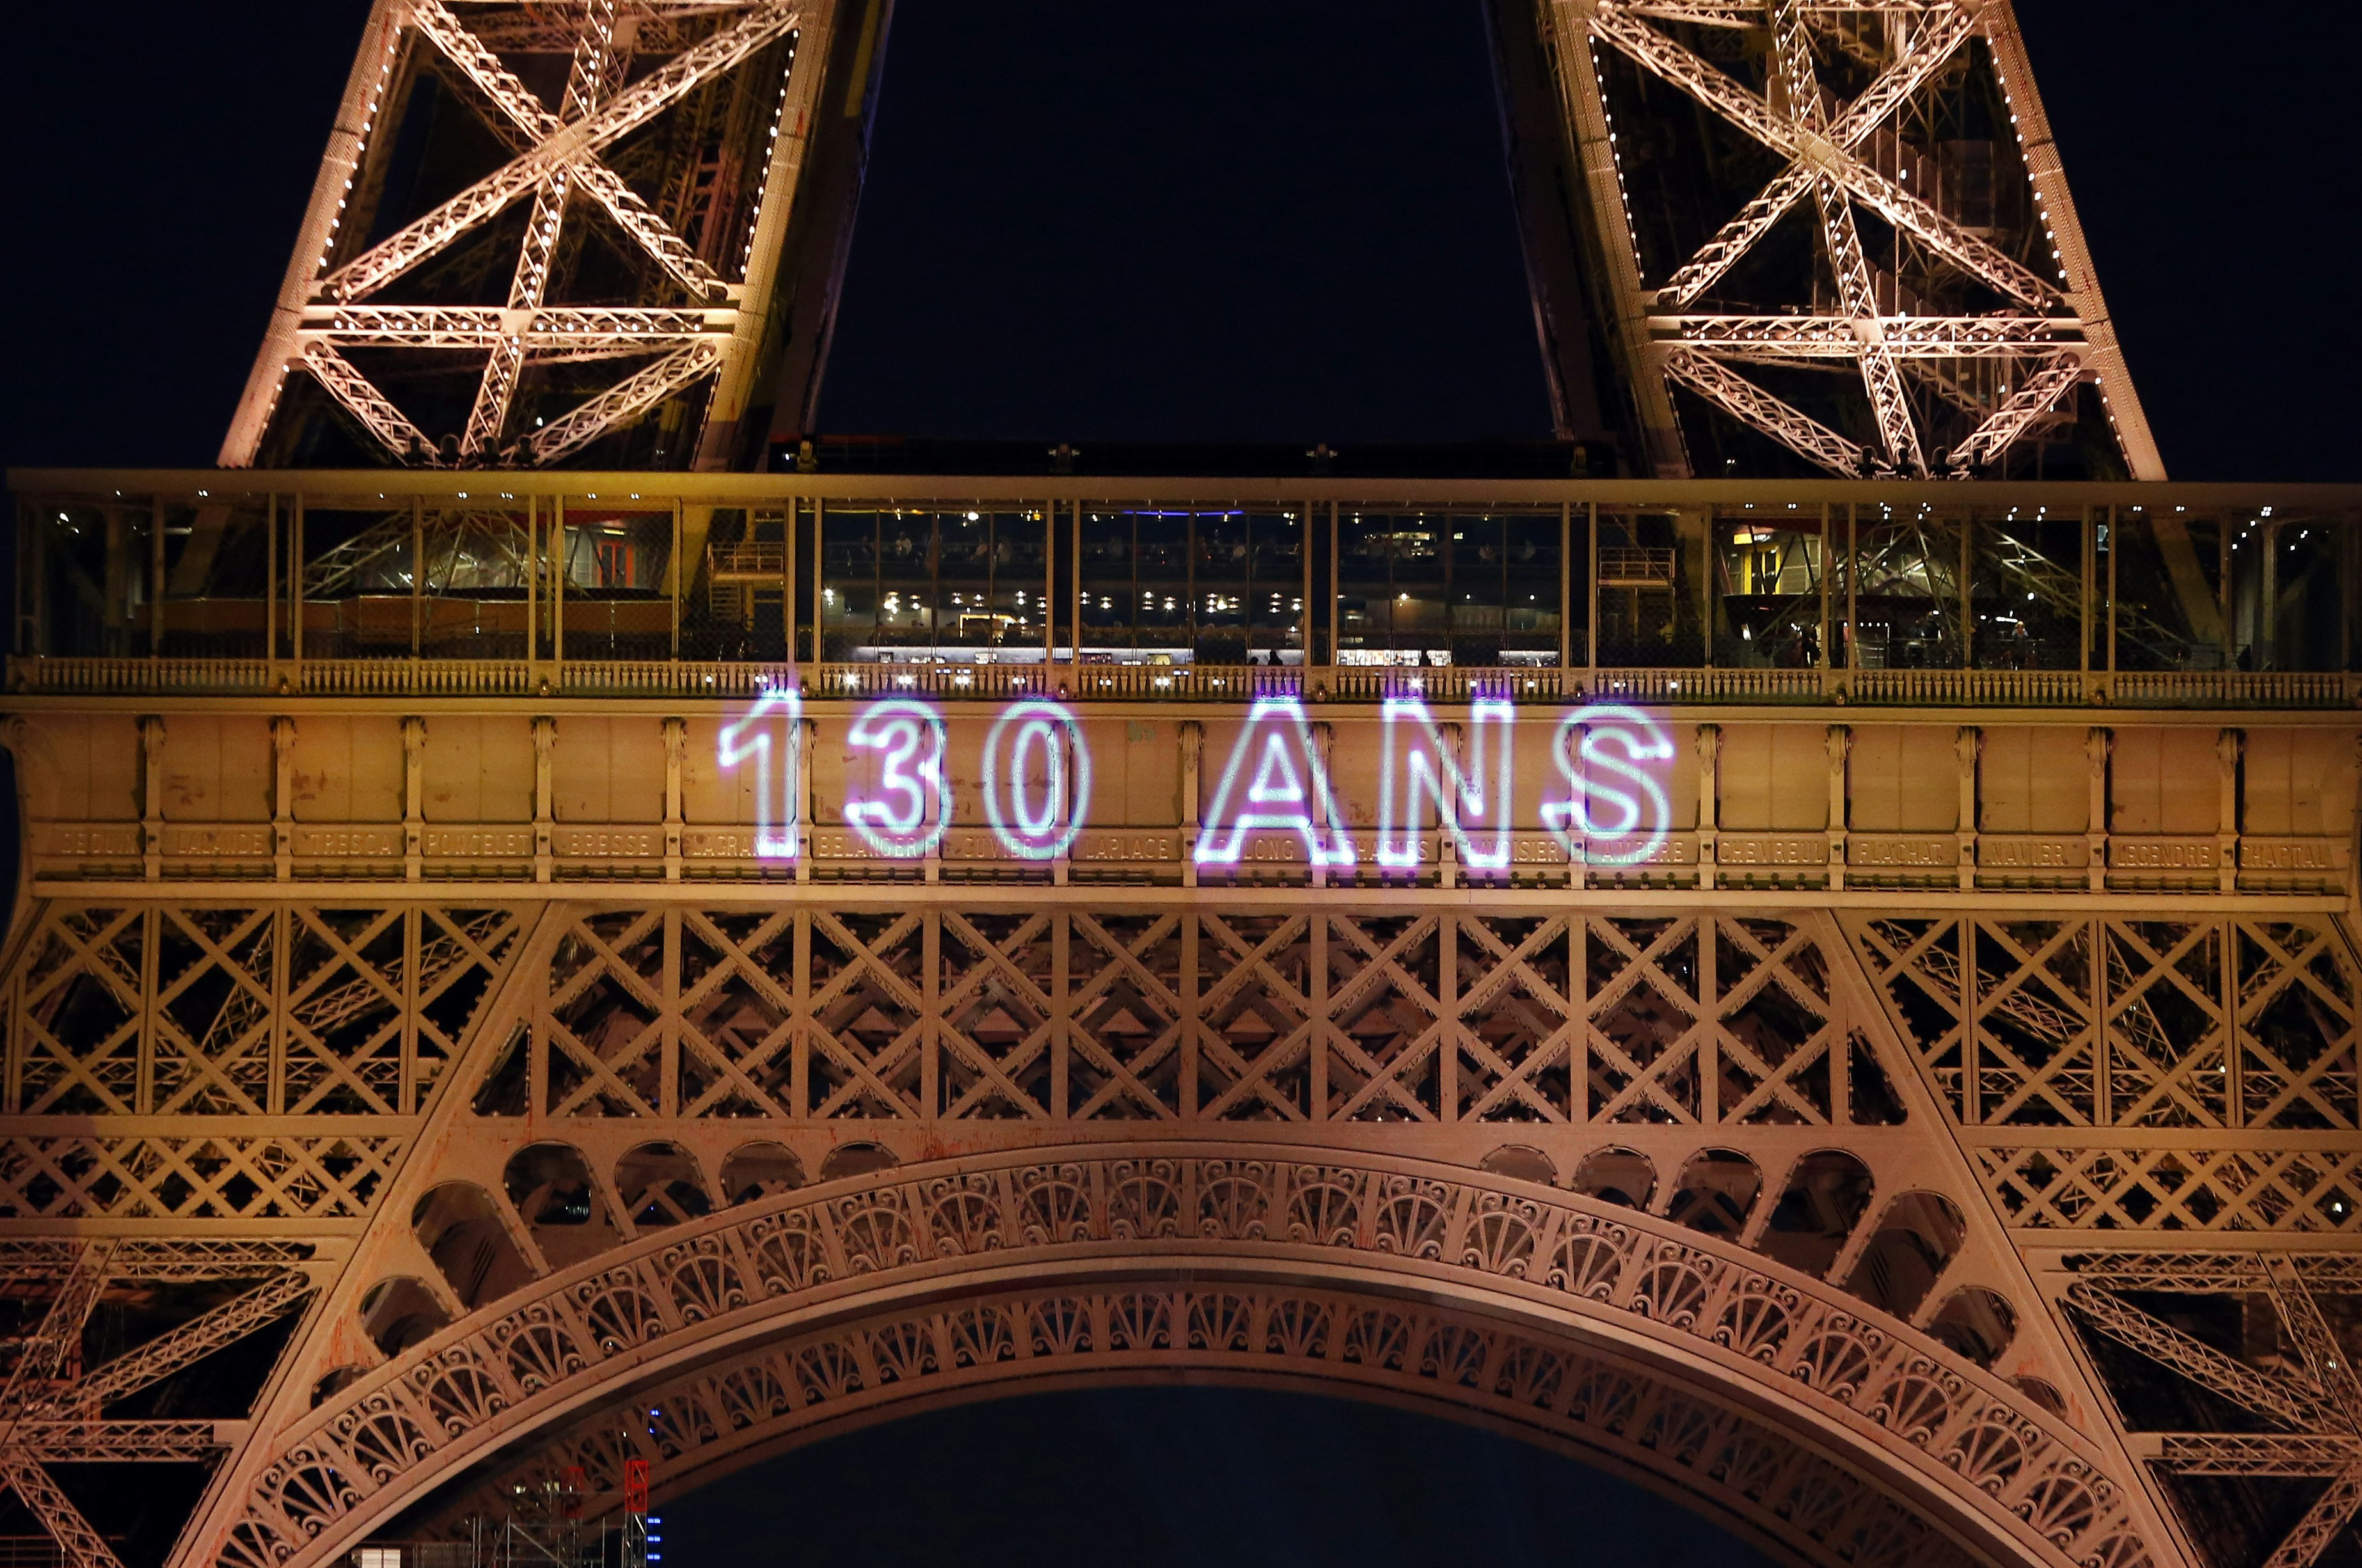 The Eiffel Tower is lit up to mark 130 years since it was built. 